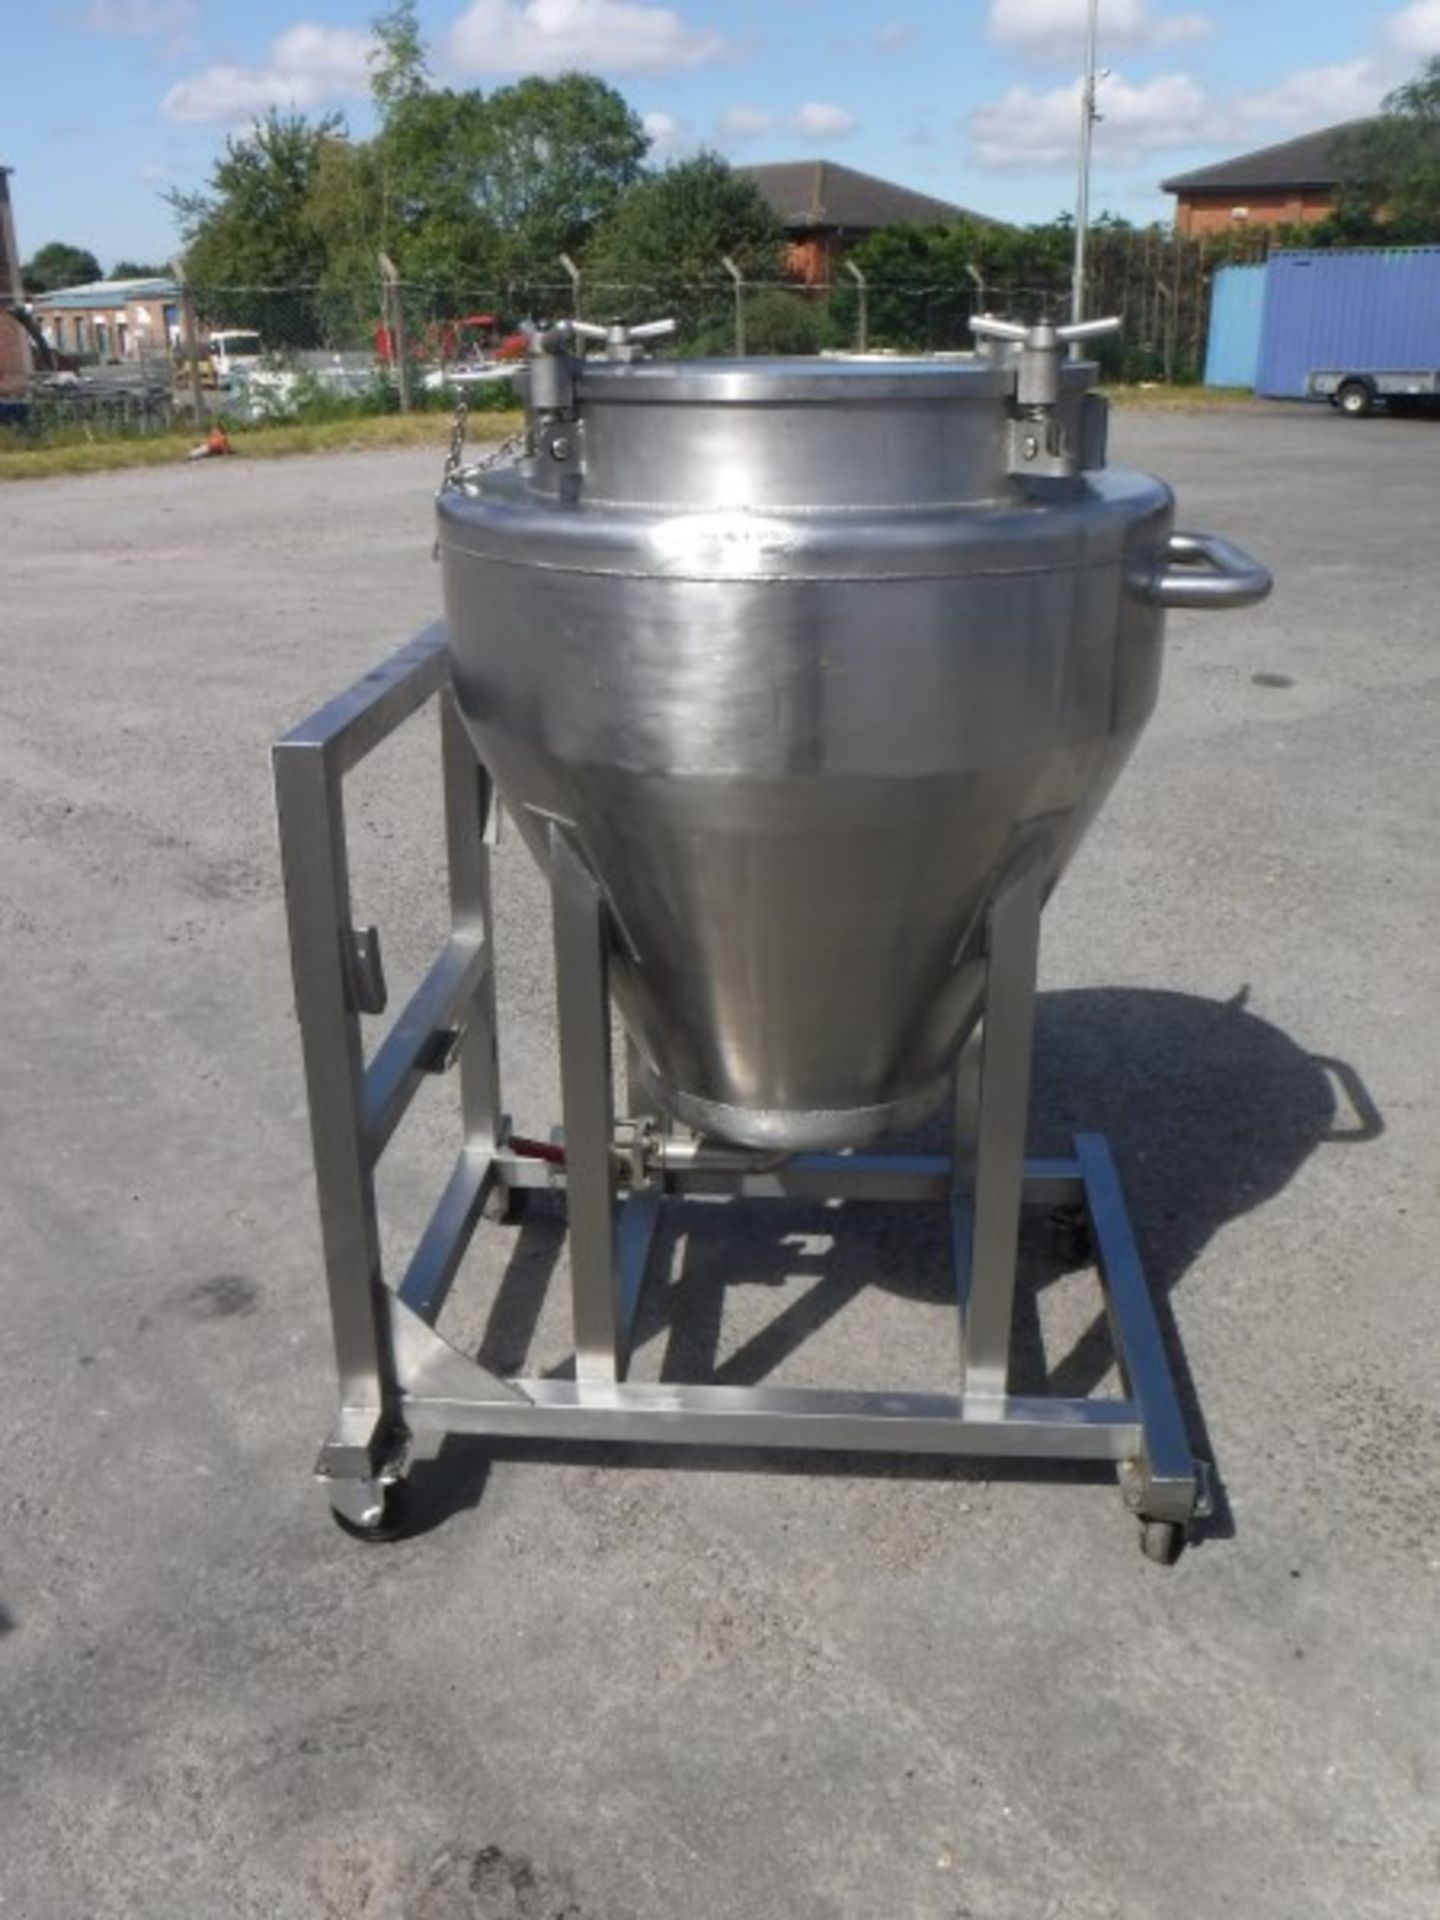 Stainless Steel 150 Litre Mobile Vessel, Outlet 1 1/2 inch RJT, Overall Height : 1400 mm, fitted - Bild 2 aus 5